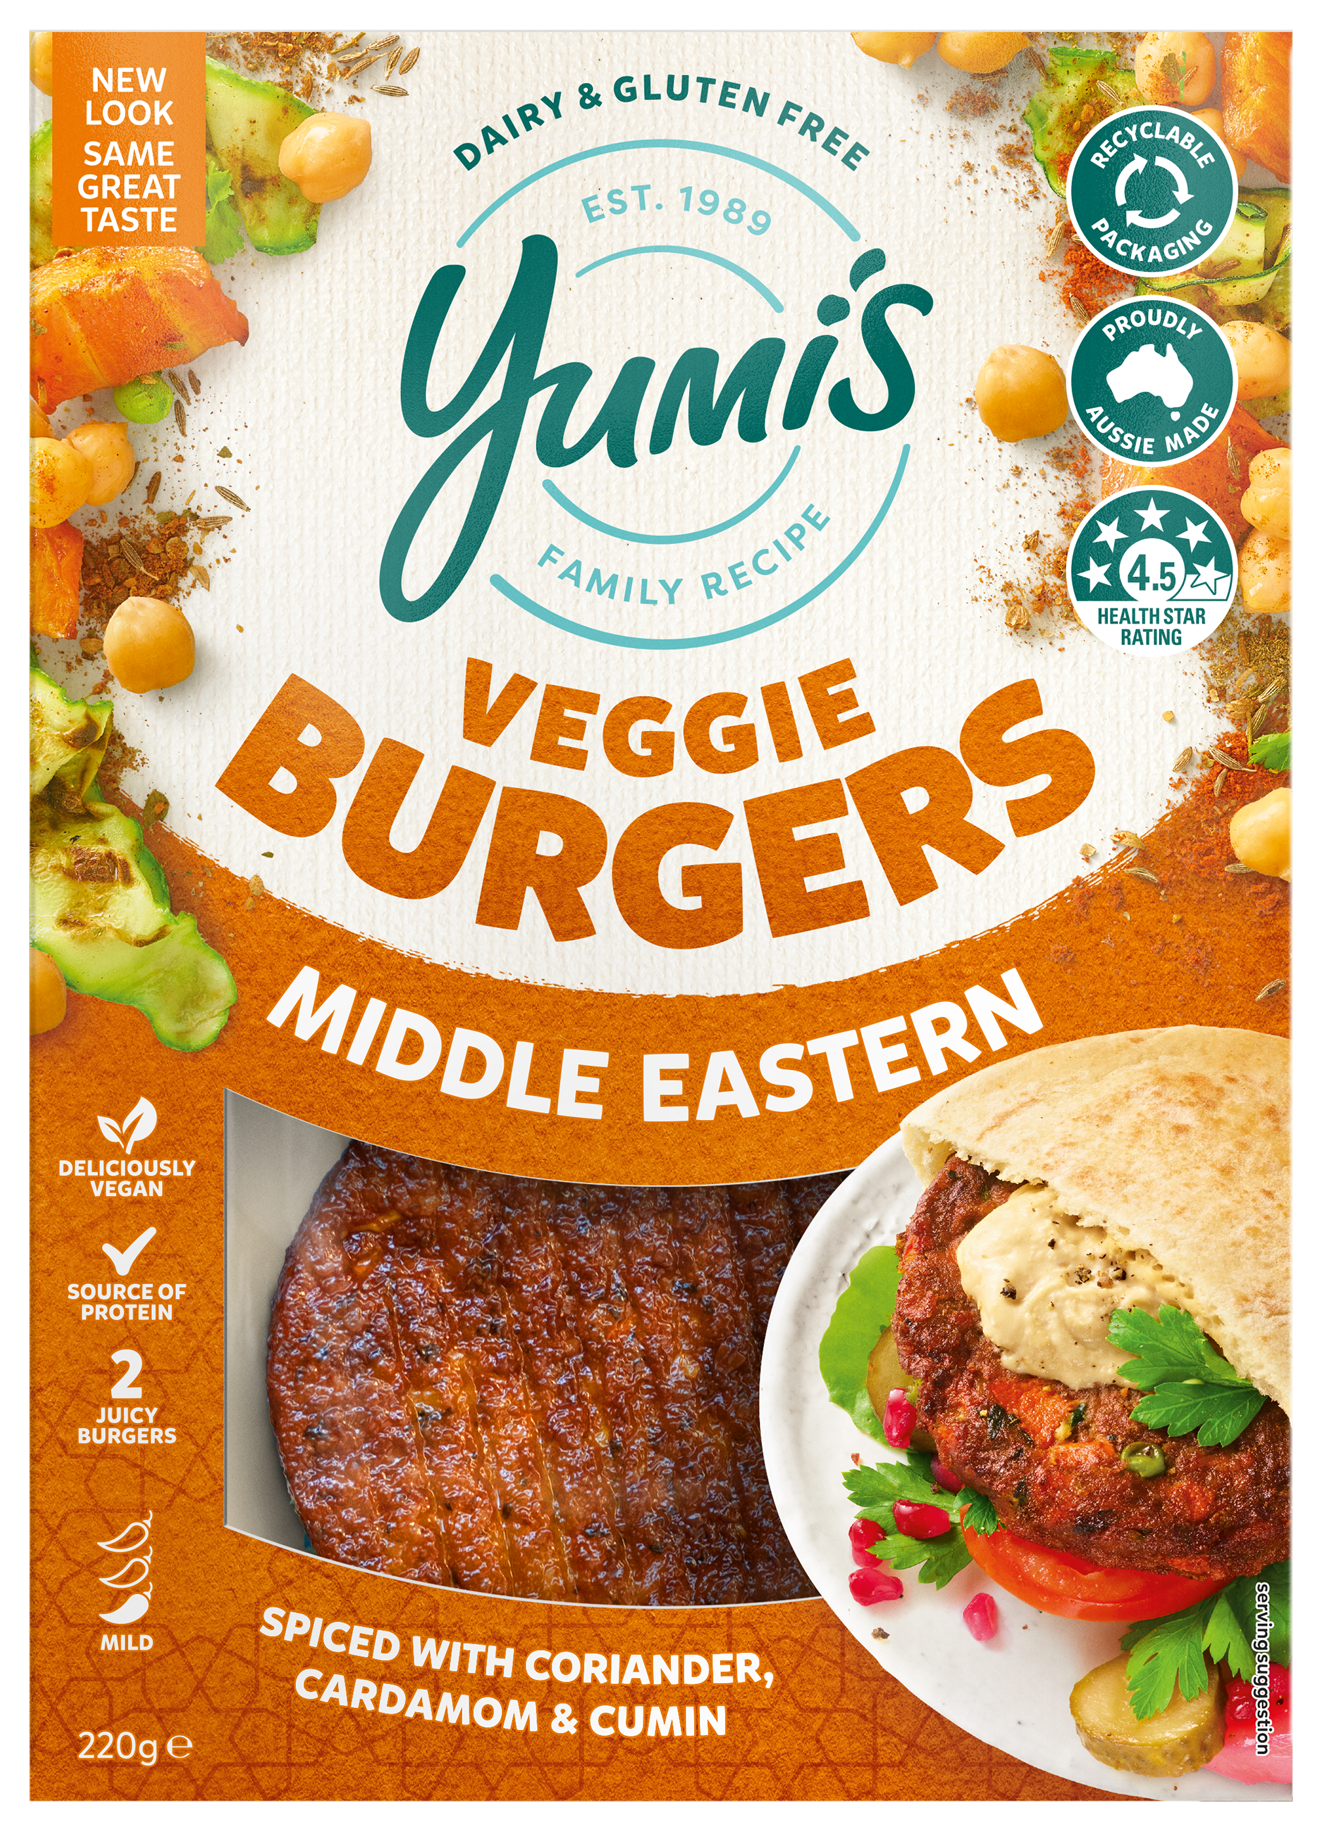 2667-Yumis-Burgers-Front-2D-Middle-Eastern-LR.png